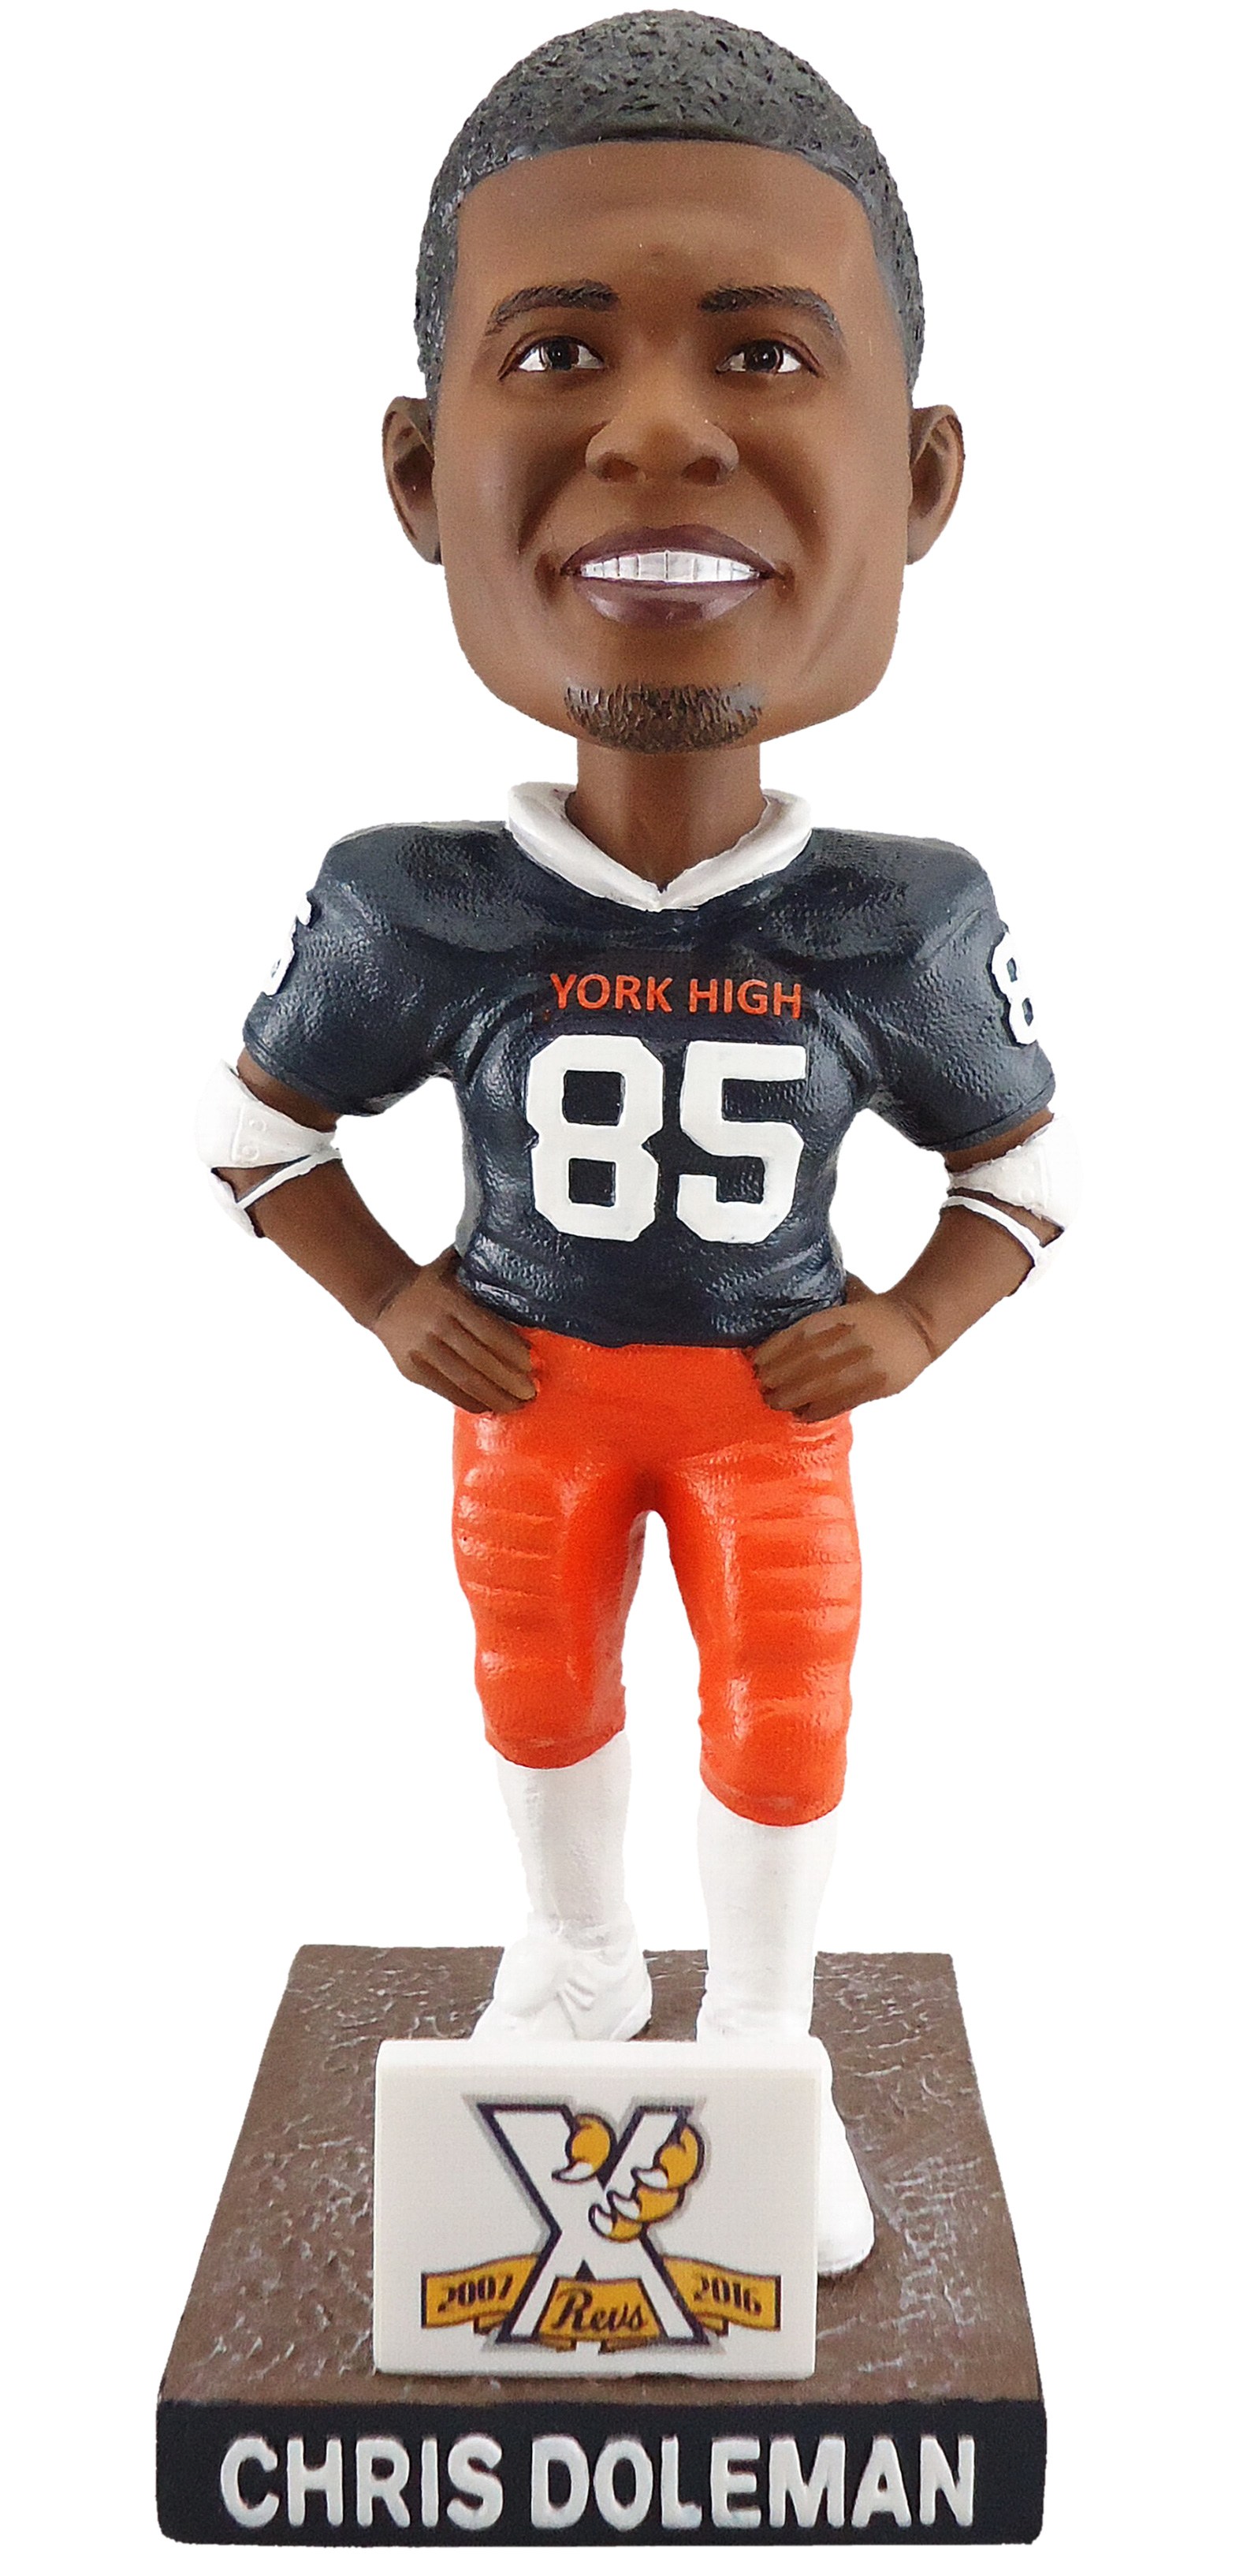 York Revolution's Chris Doleman Bobblehead - June 1, 2016 Photo on OurSports Central